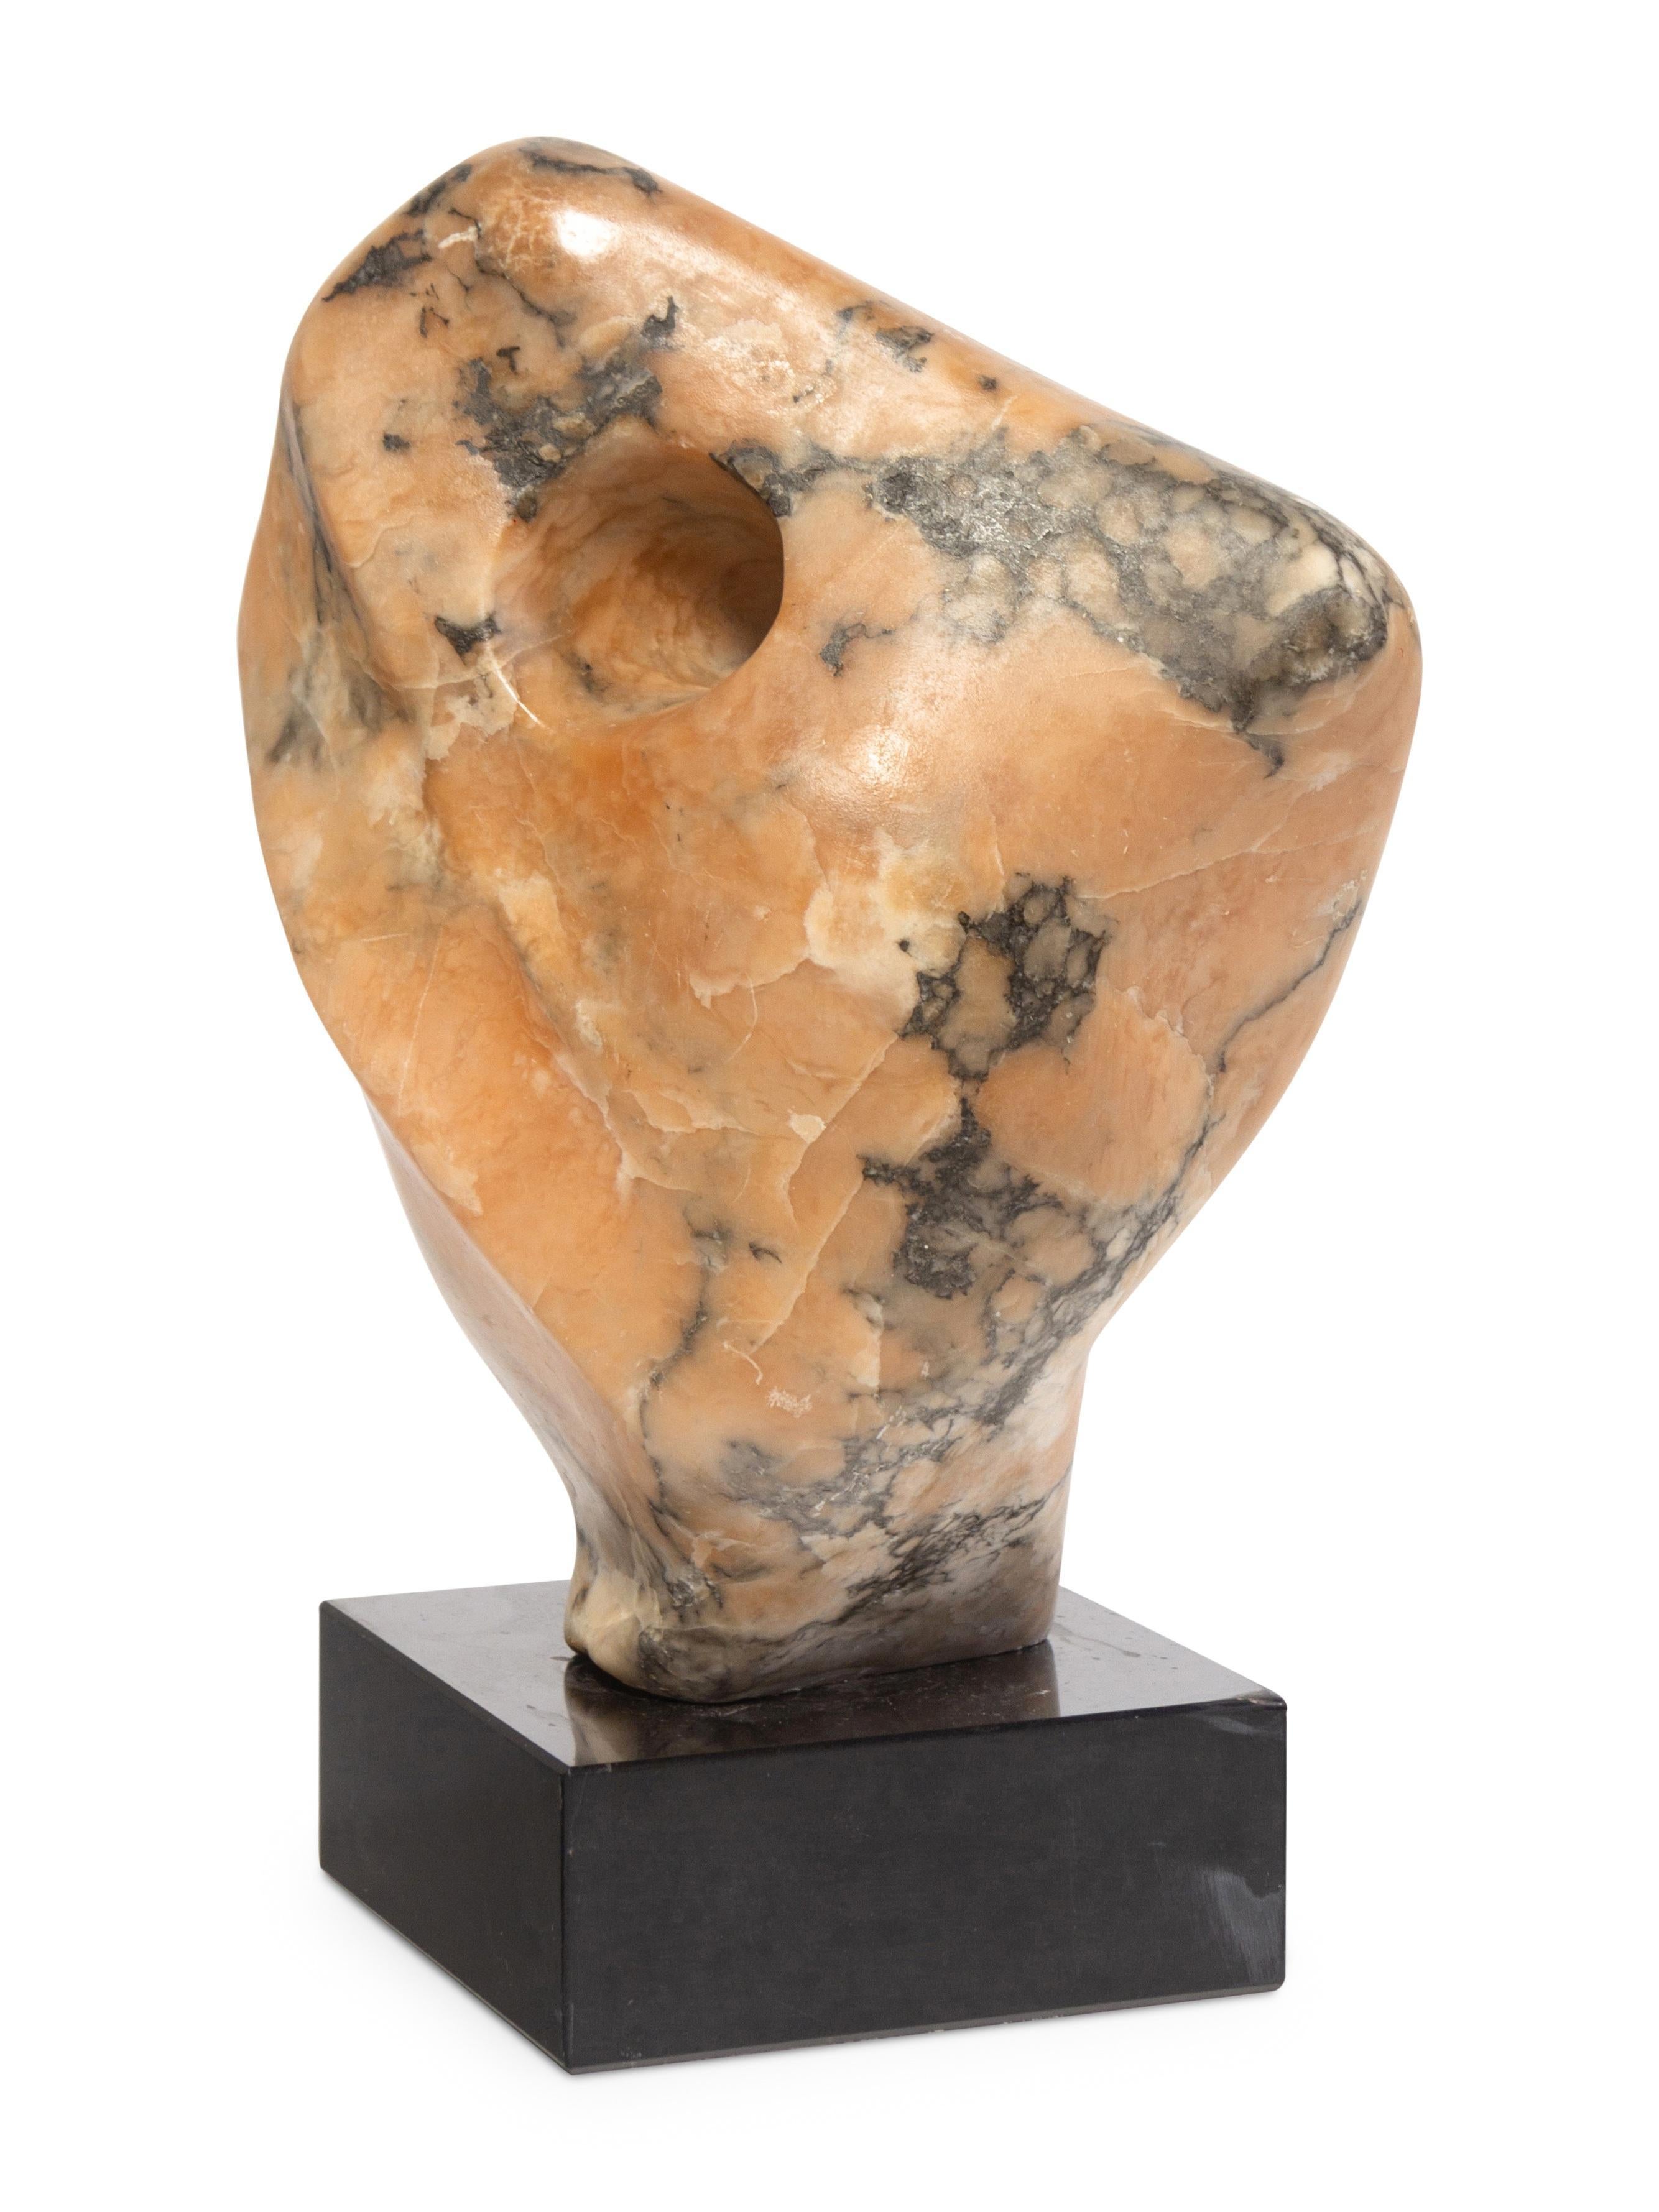 Joan Hyde Shapiro's abstract marble sculpture is a mesmerizing exploration of form and movement. This piece stands as a testament to Shapiro's ability to manipulate stone into evocative shapes transcending the limitations of the marble medium,